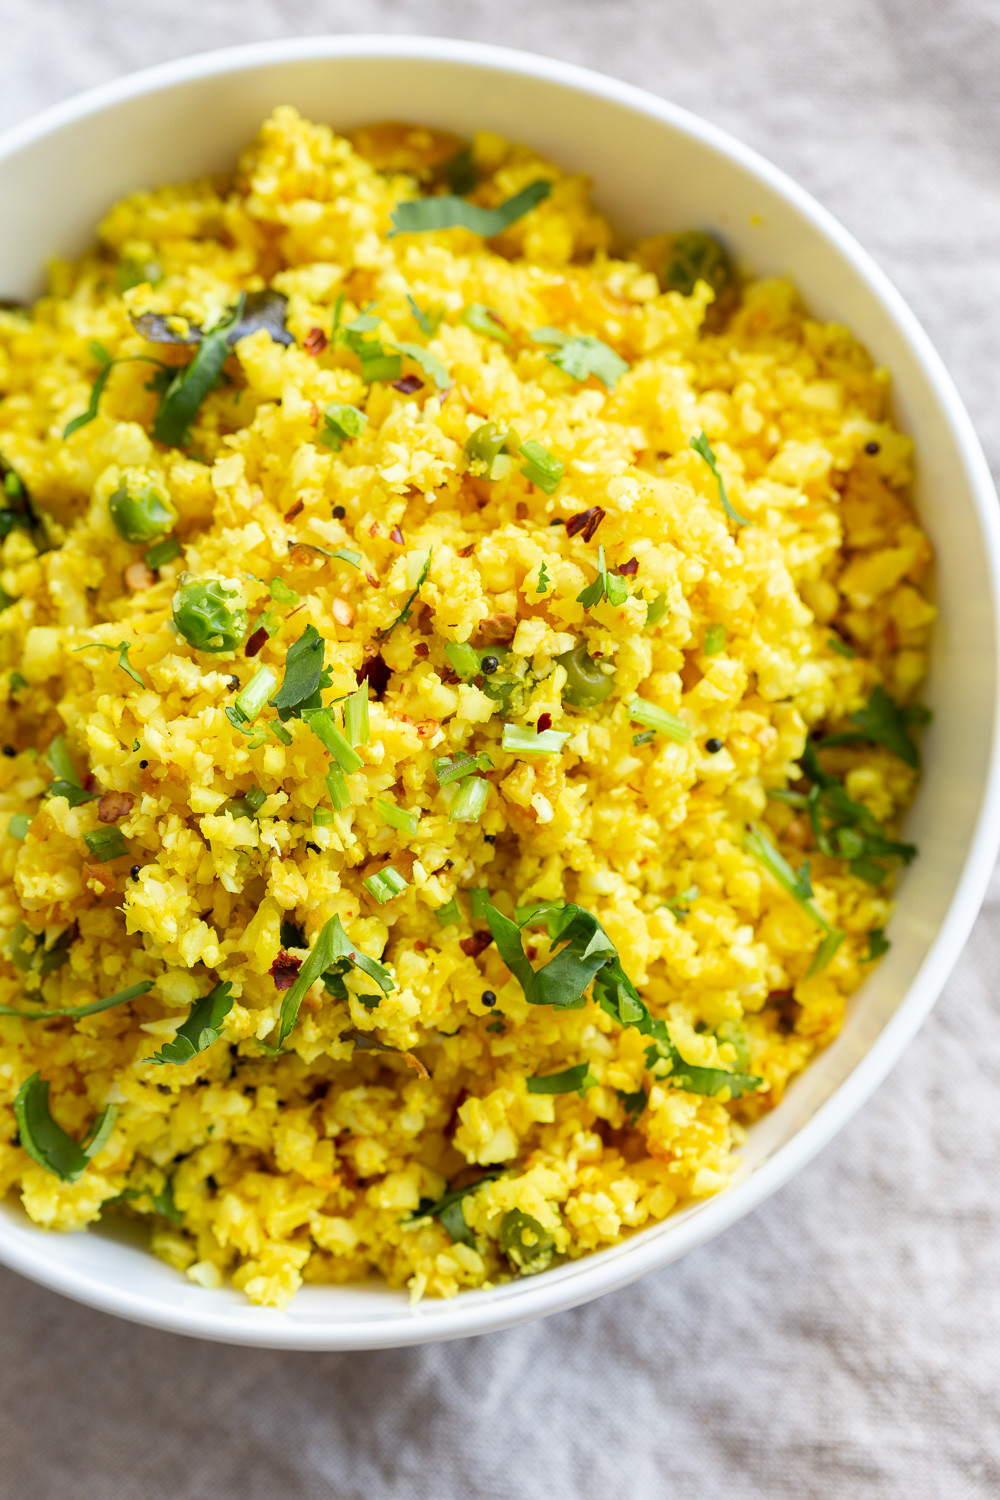 Cauliflower Rice Recipes Indian
 Vegan Richa Vegan Food Blog with Healthy and Flavorful